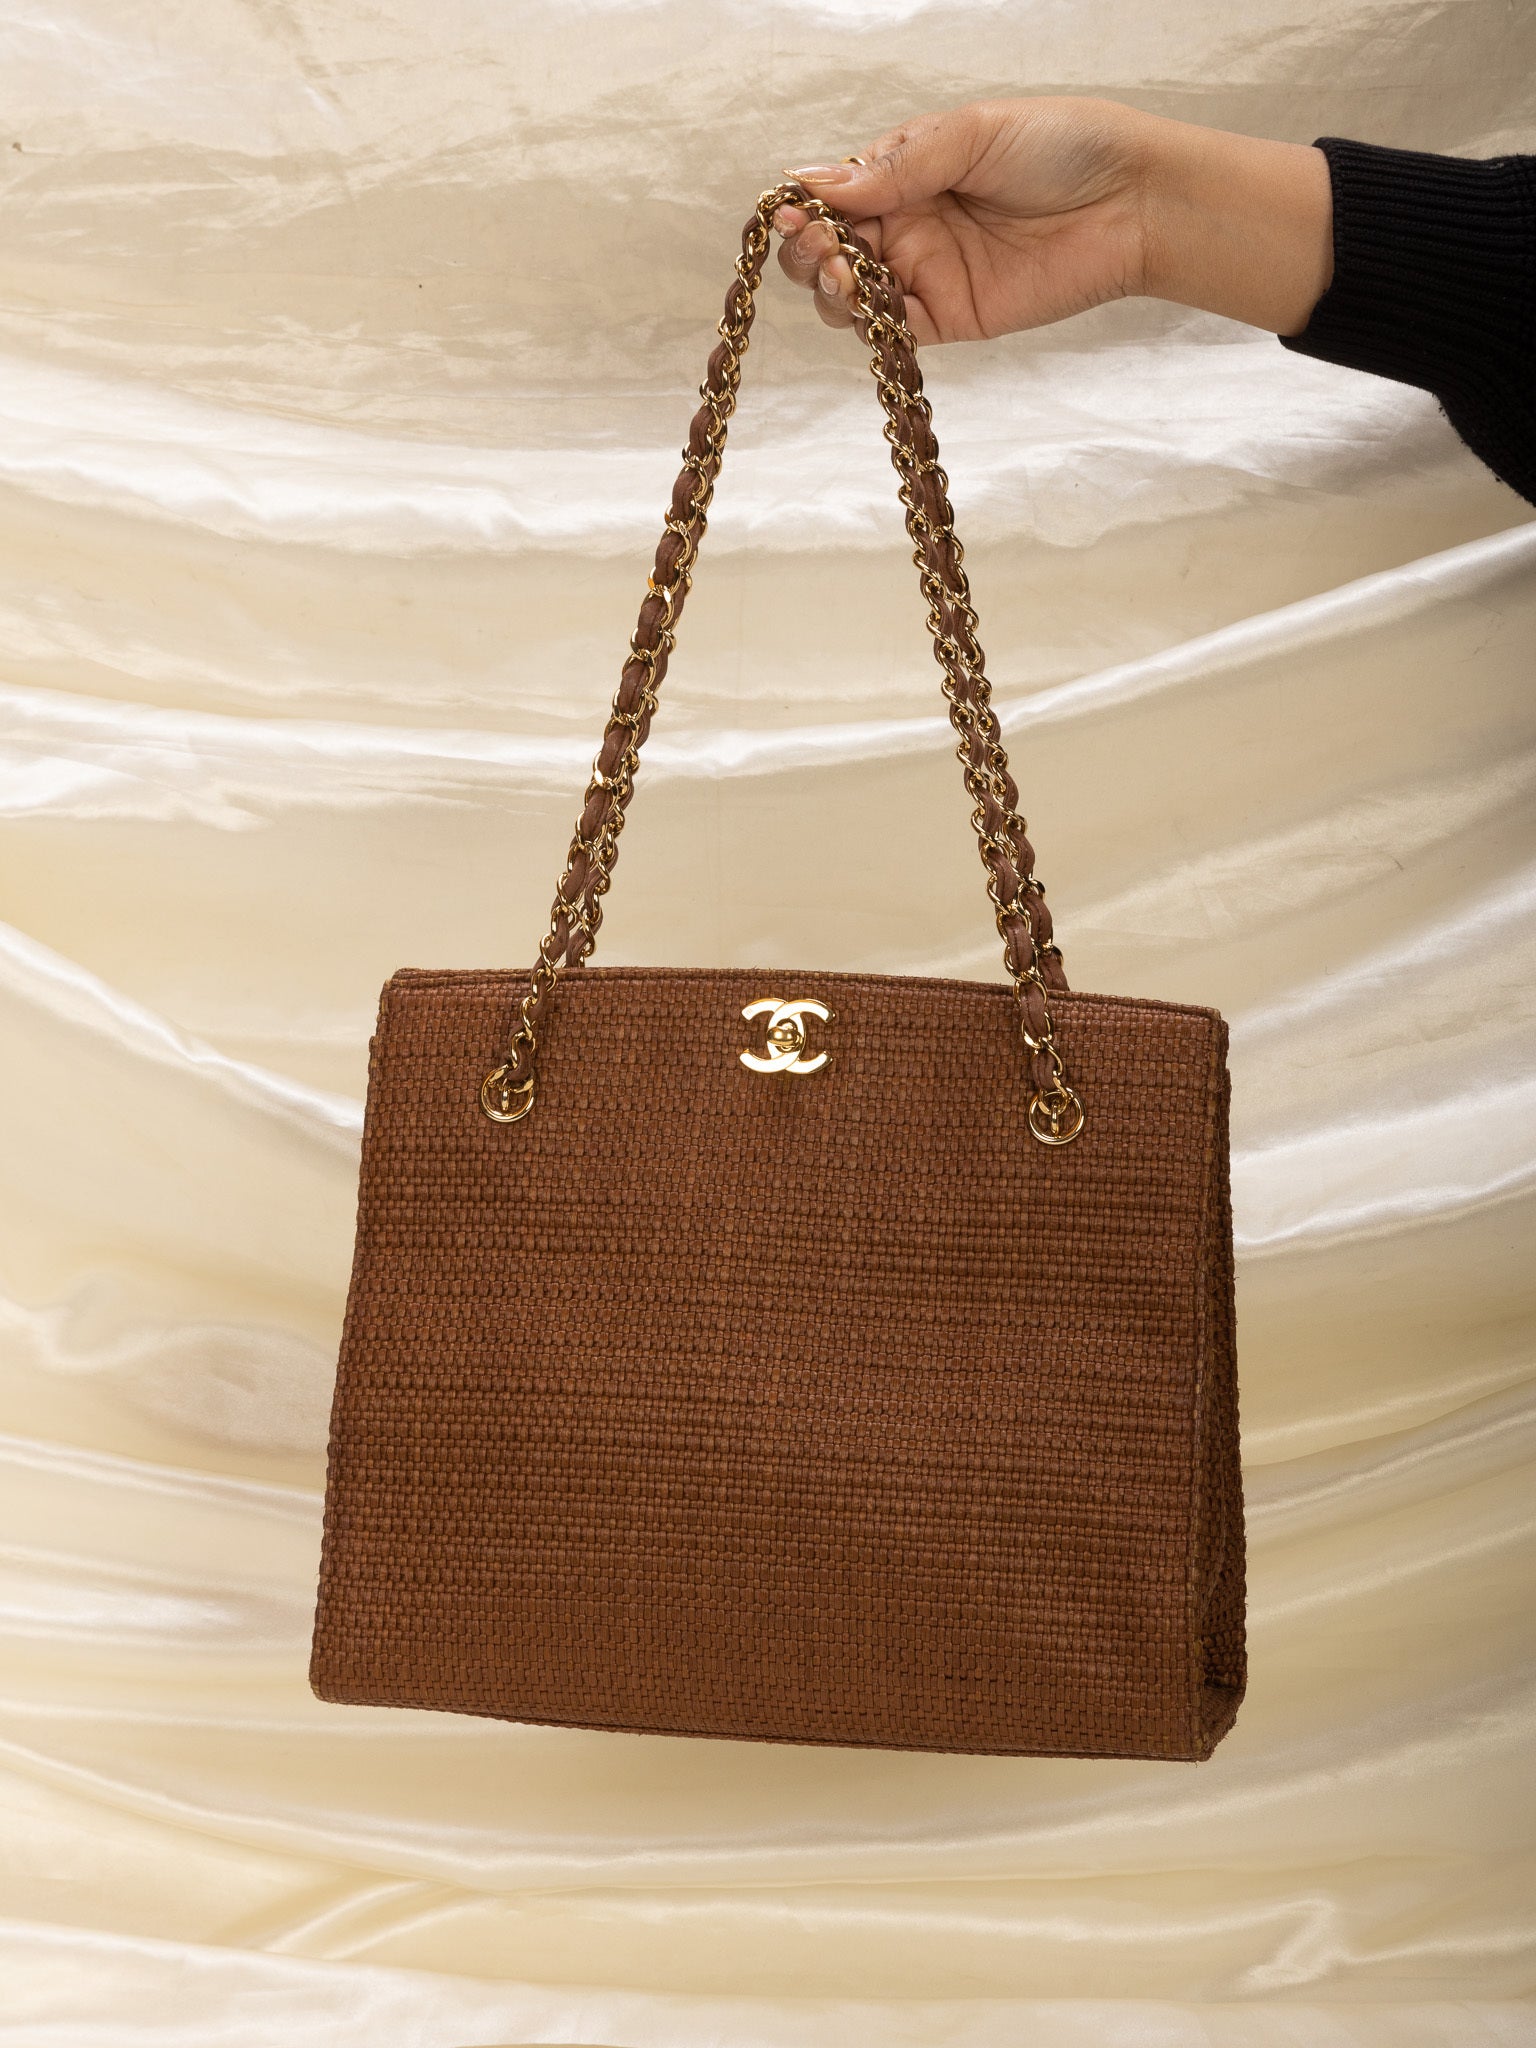 Extremely Rare Chanel Straw Raffia Turnlock Tote